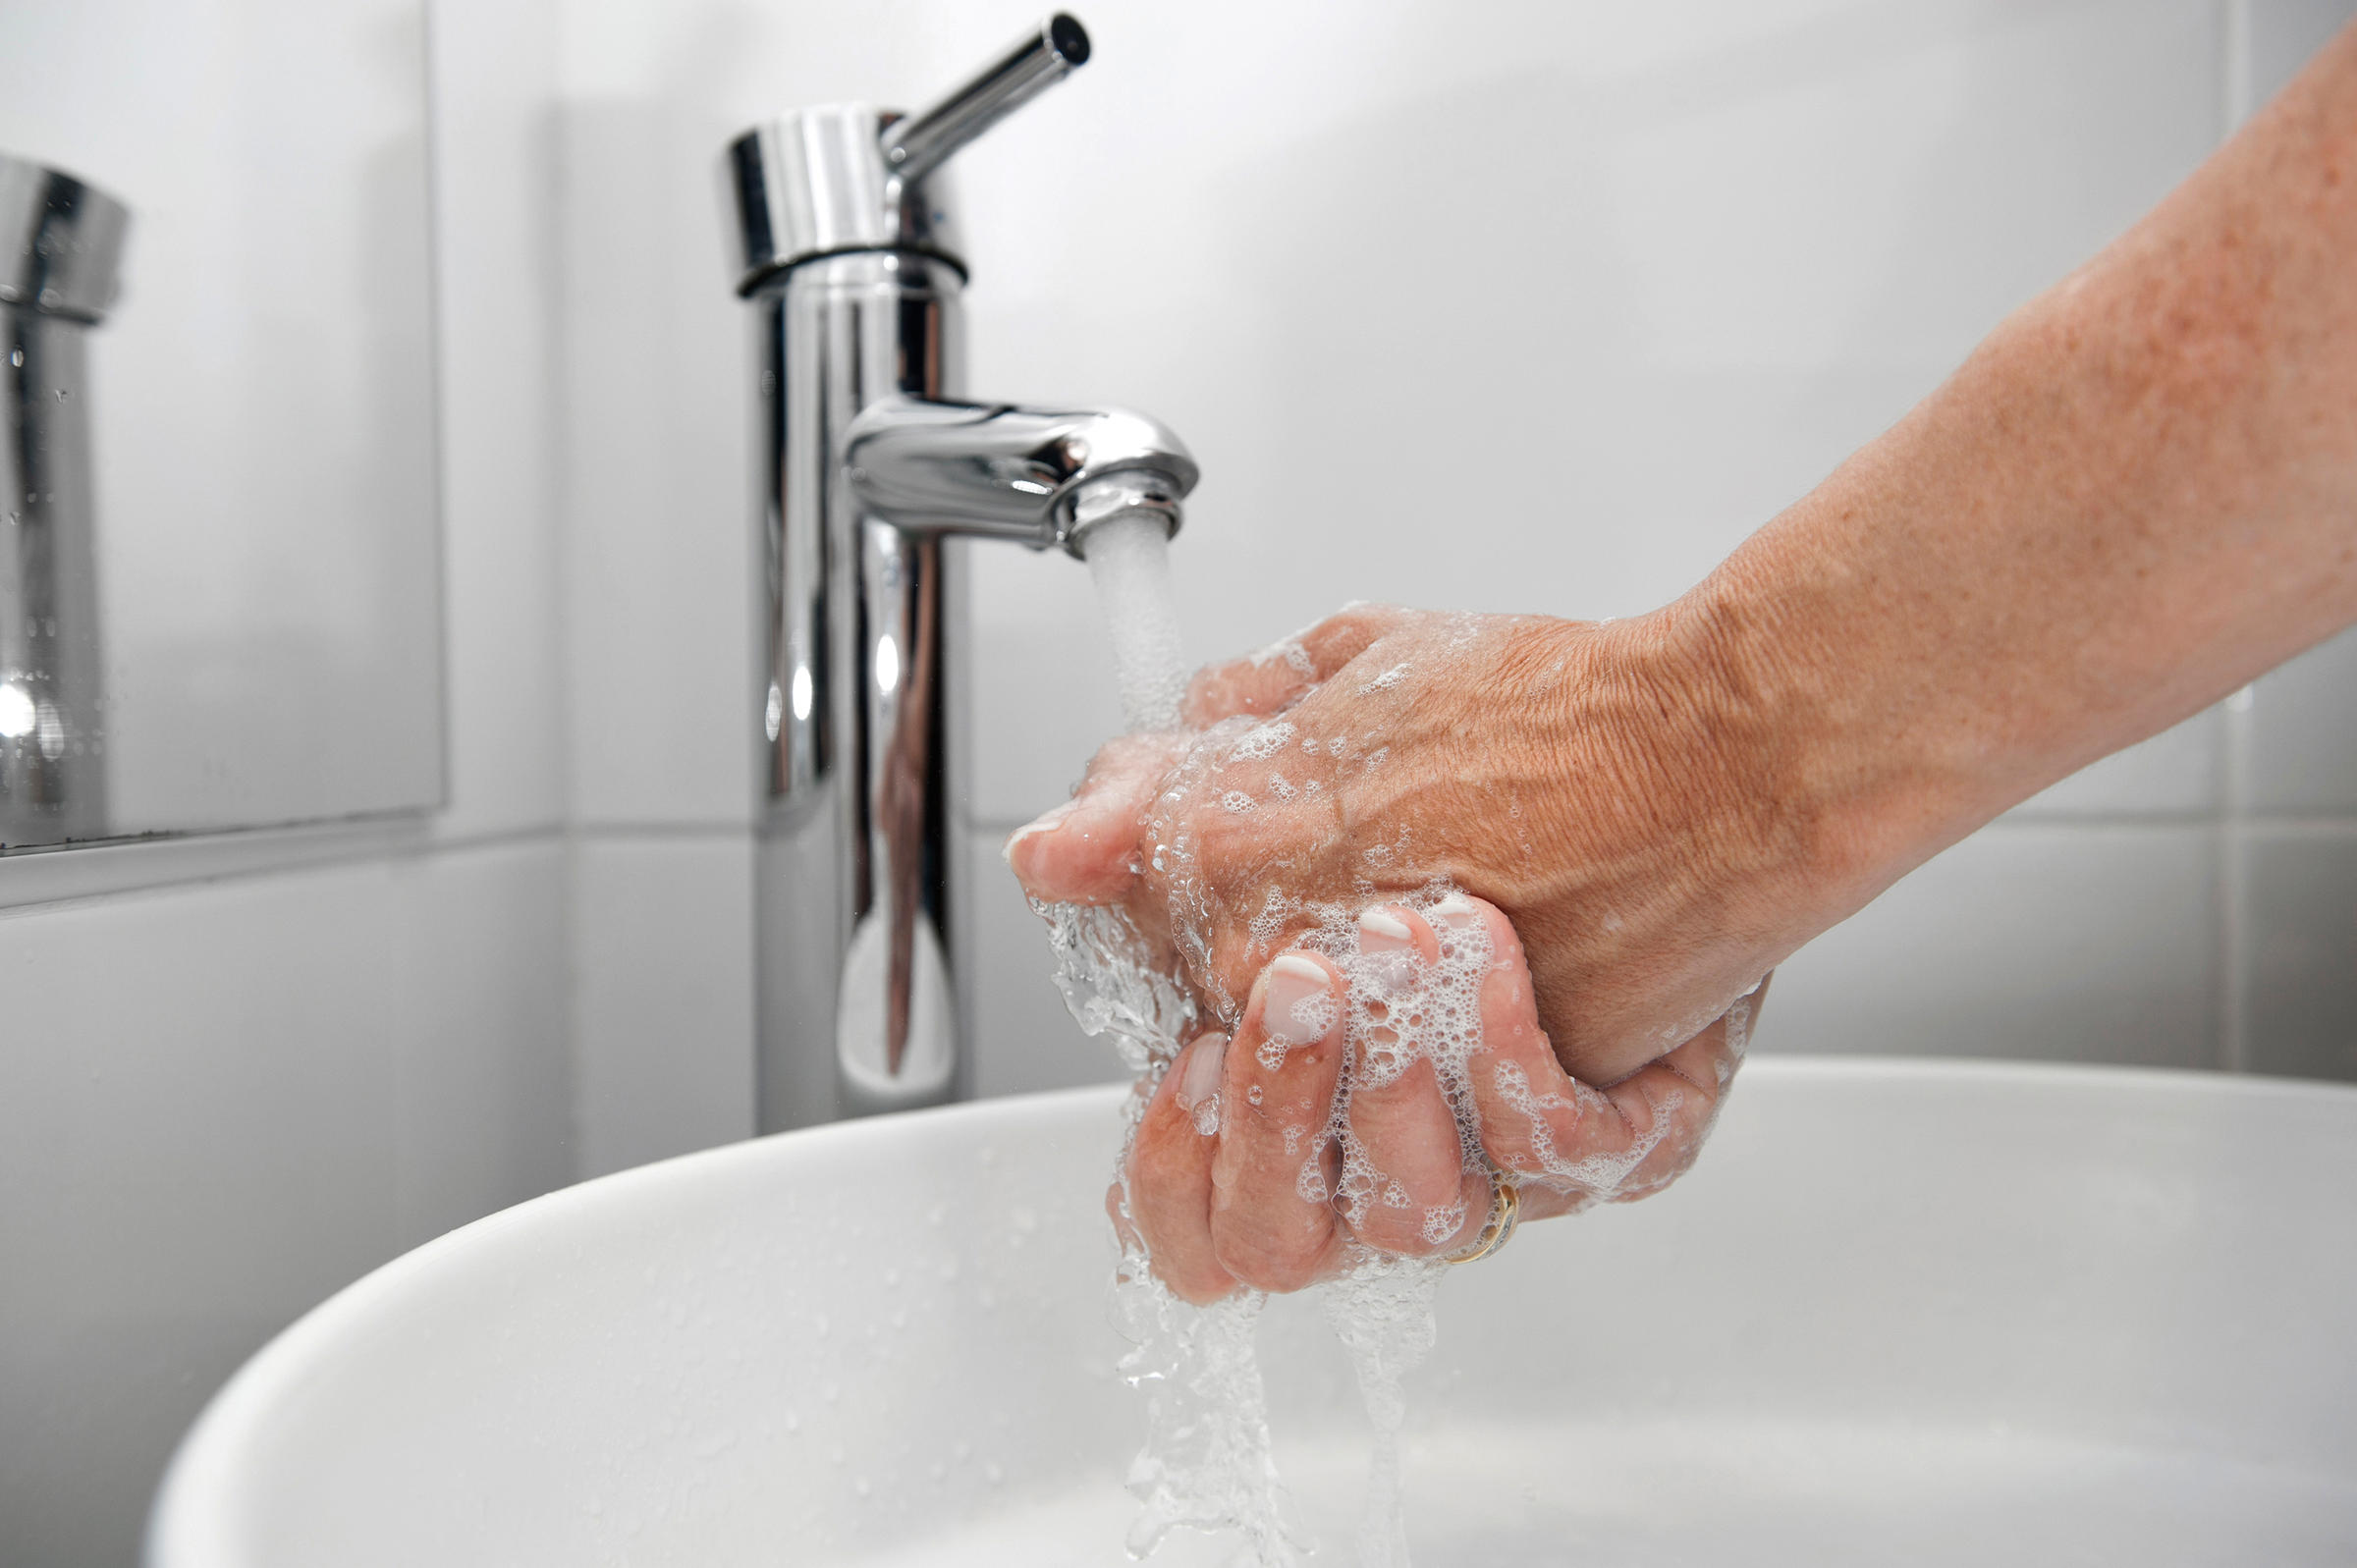 Hand-washing: One of public health's most powerful weapons, or undue regulatory burden?